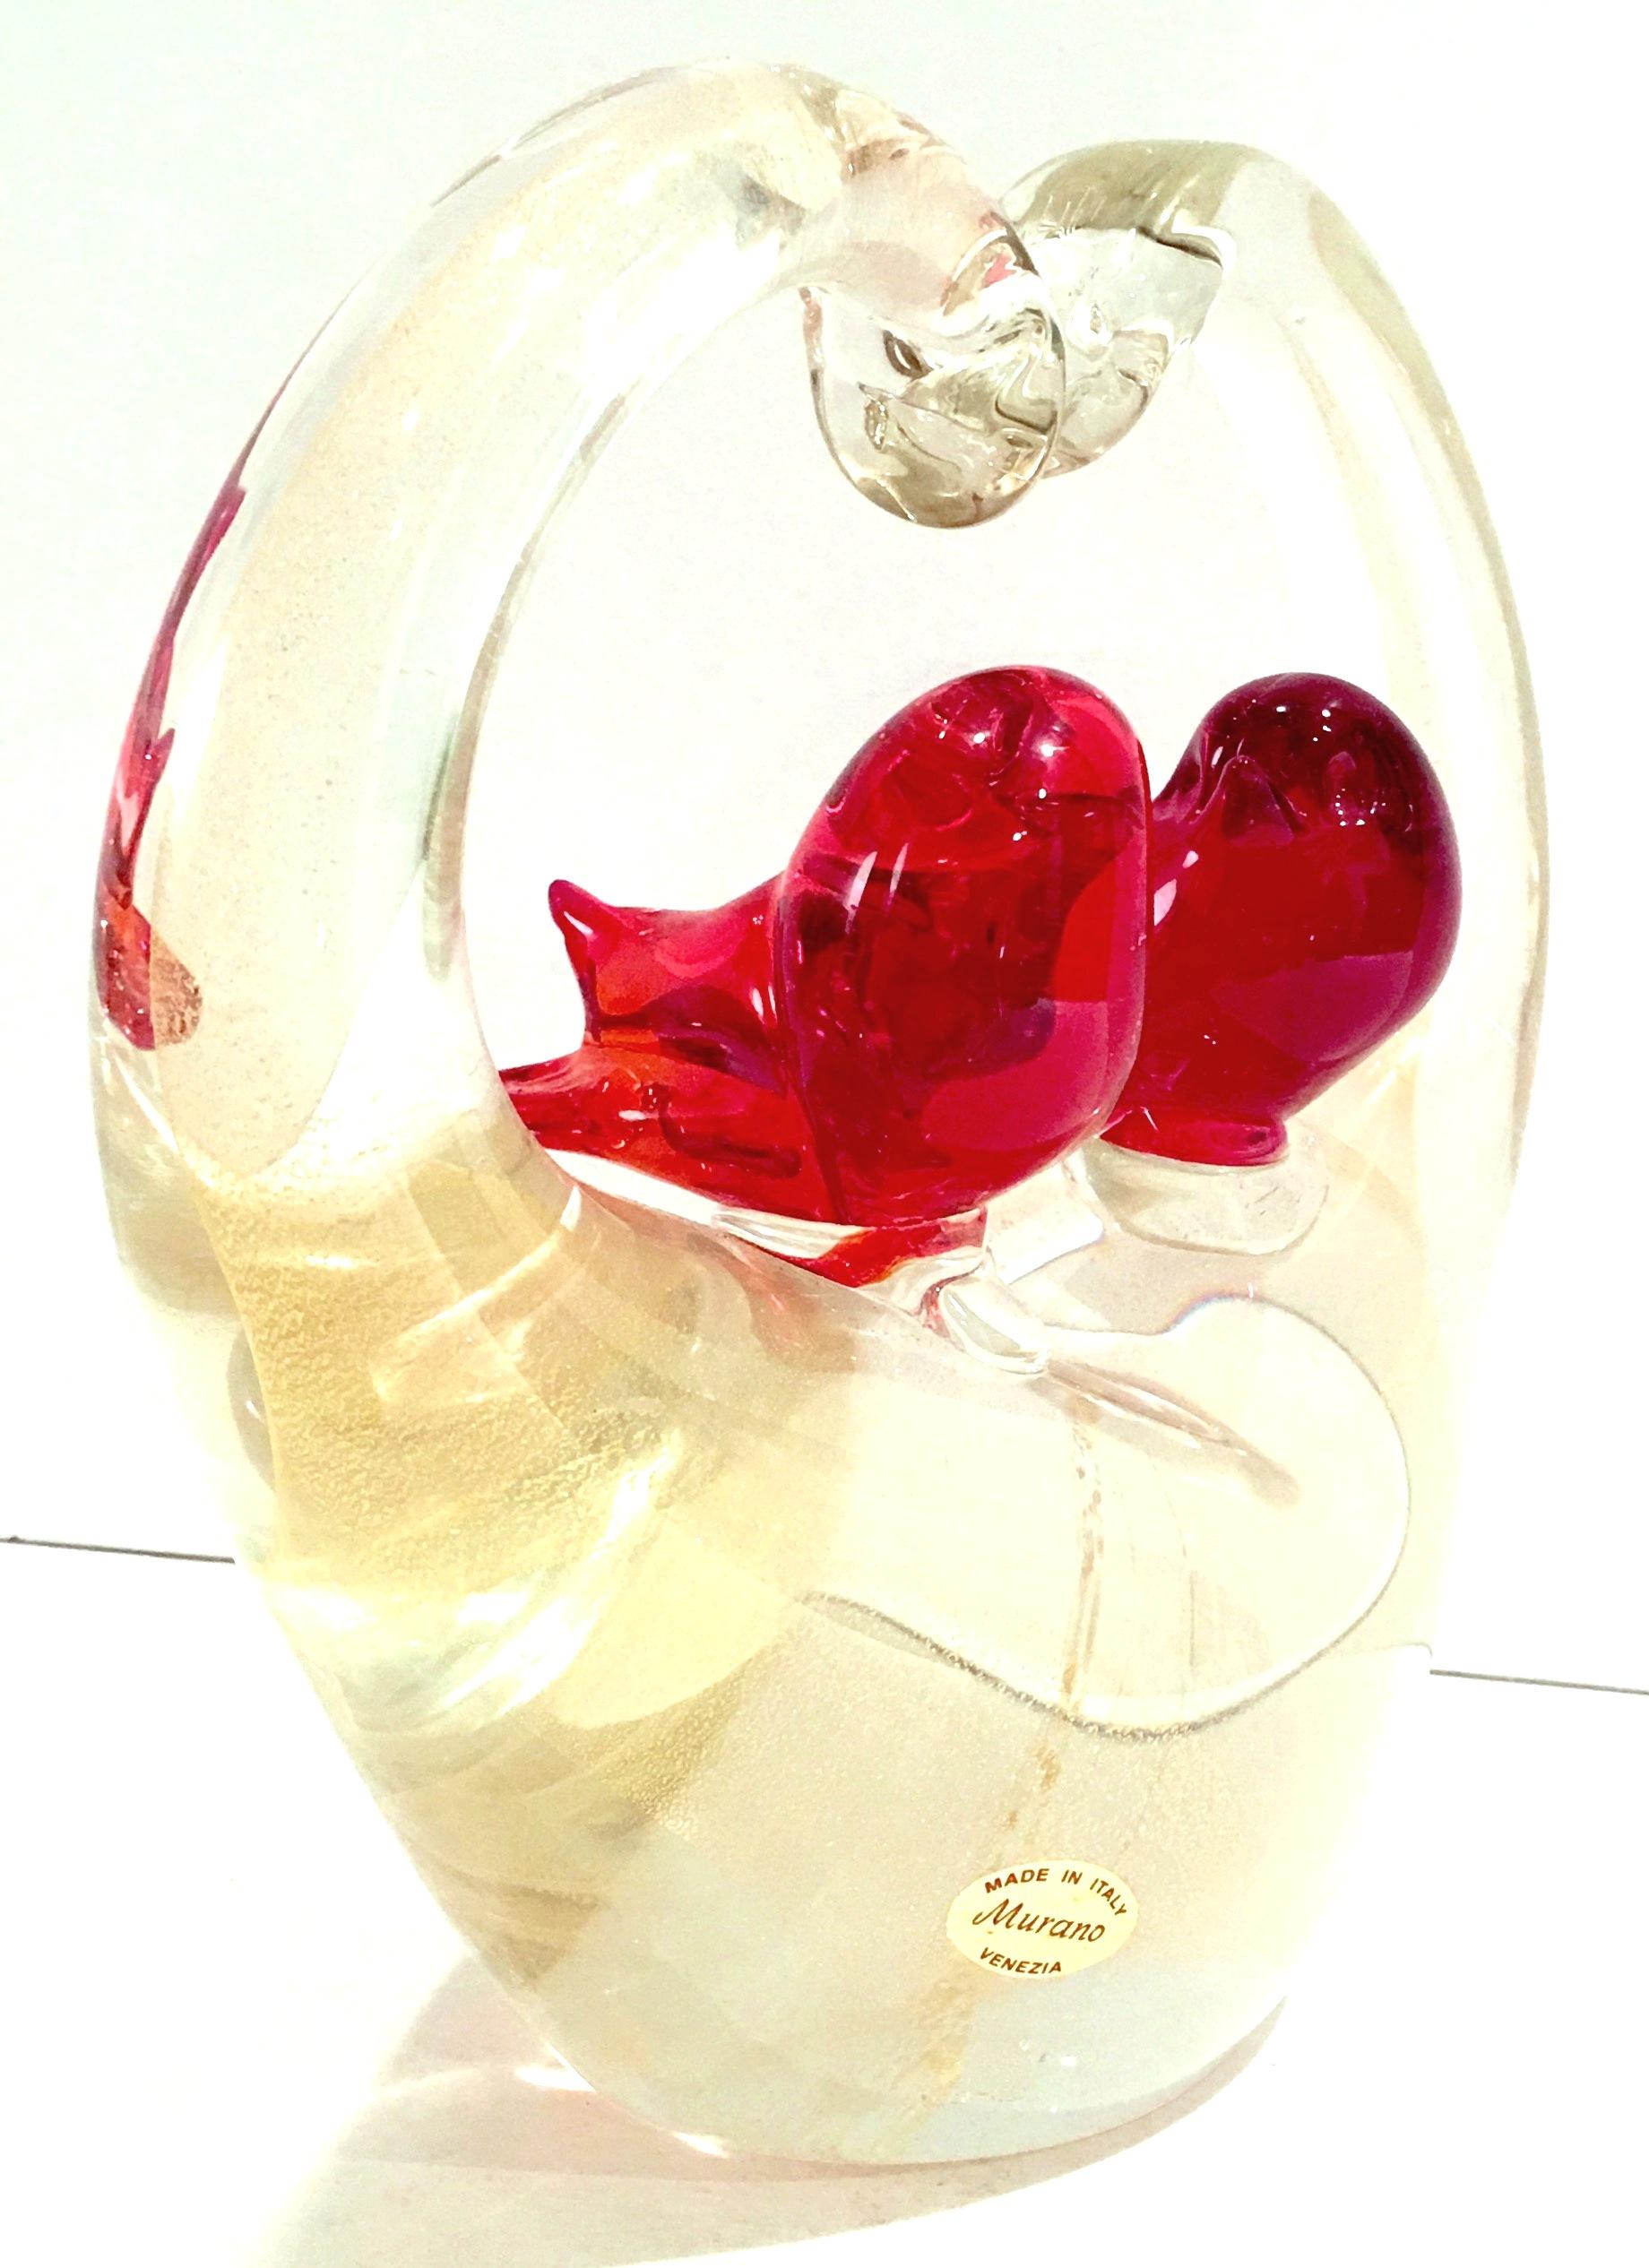 Midcentury Italian Murano glass ruby and gold fleck pair of love birds sculpture. This coveted collectors piece features a pair of vivid ruby red Murano glass love birds perched on transparent with gold infused fleck detail (Gold Aventurine)